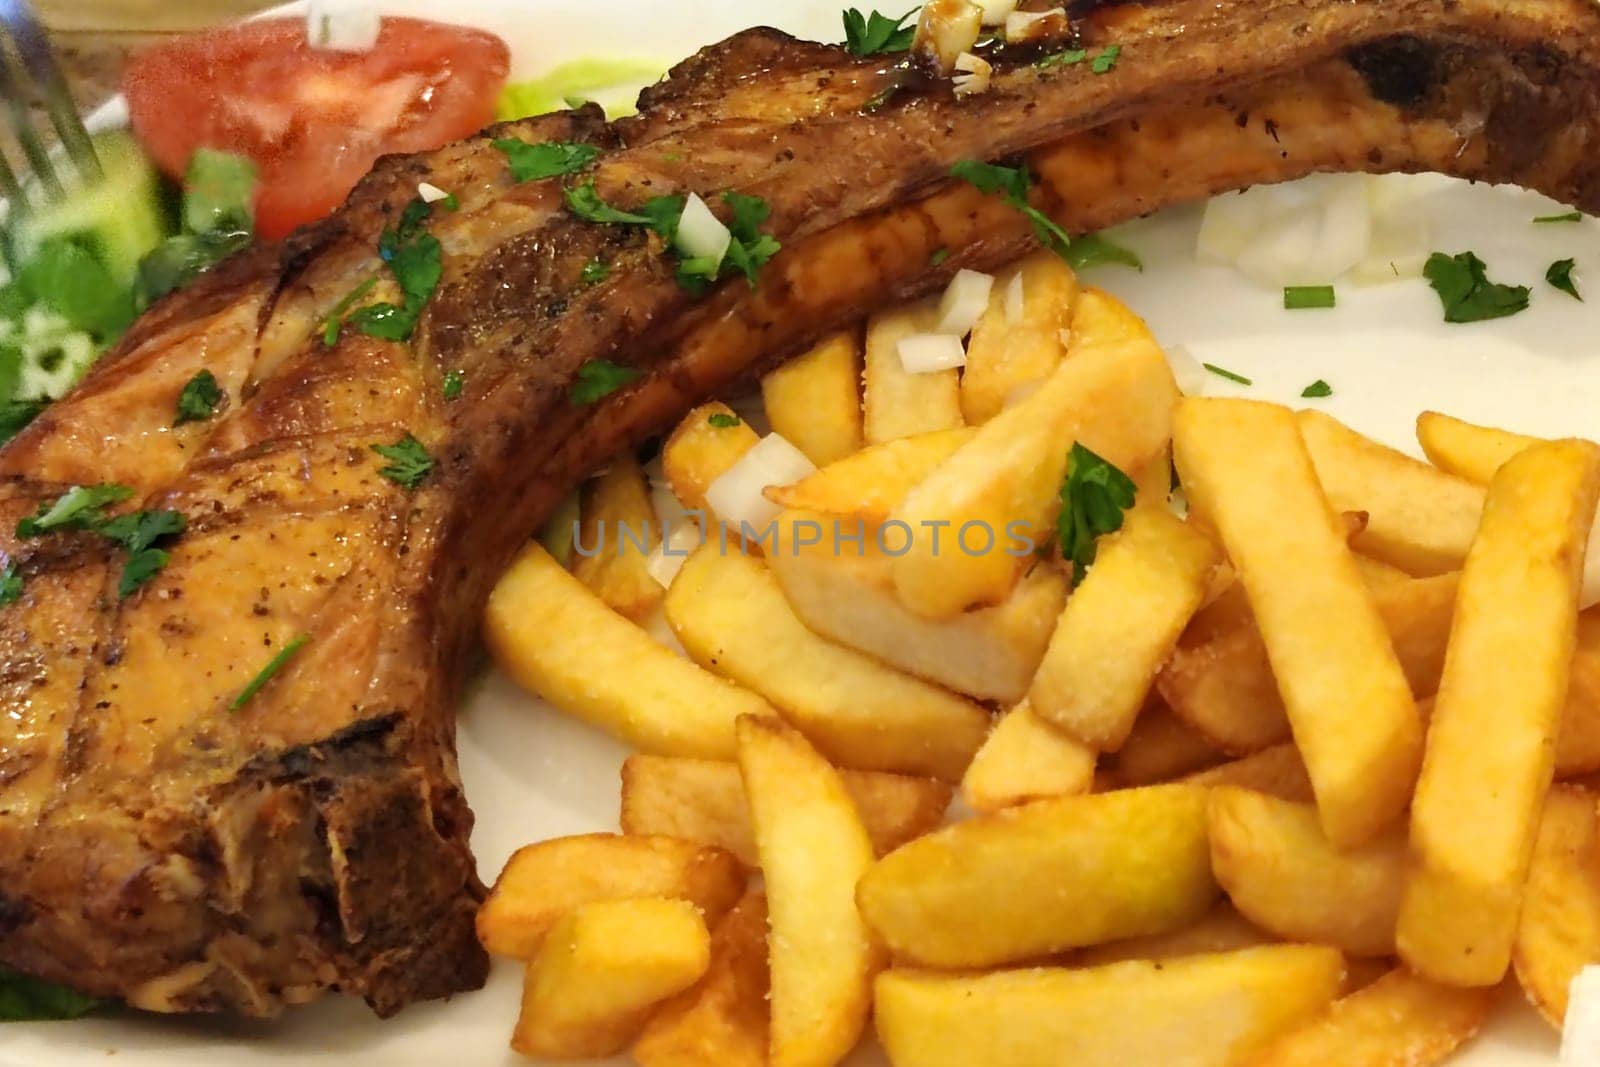 fries with fried pork on the bone by Annado